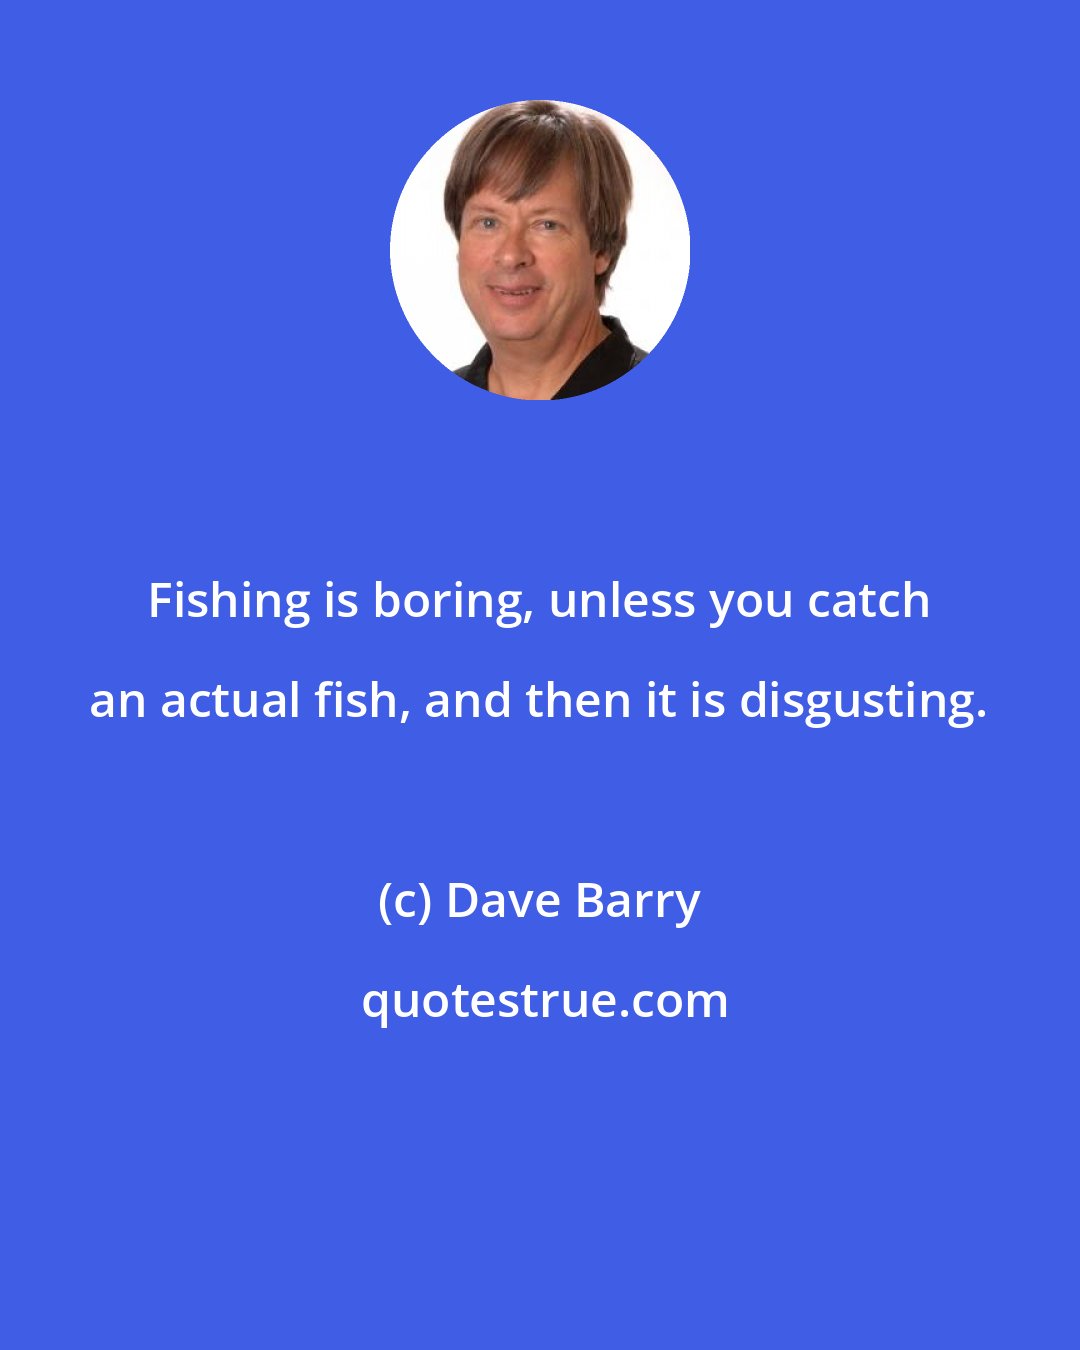 Dave Barry: Fishing is boring, unless you catch an actual fish, and then it is disgusting.